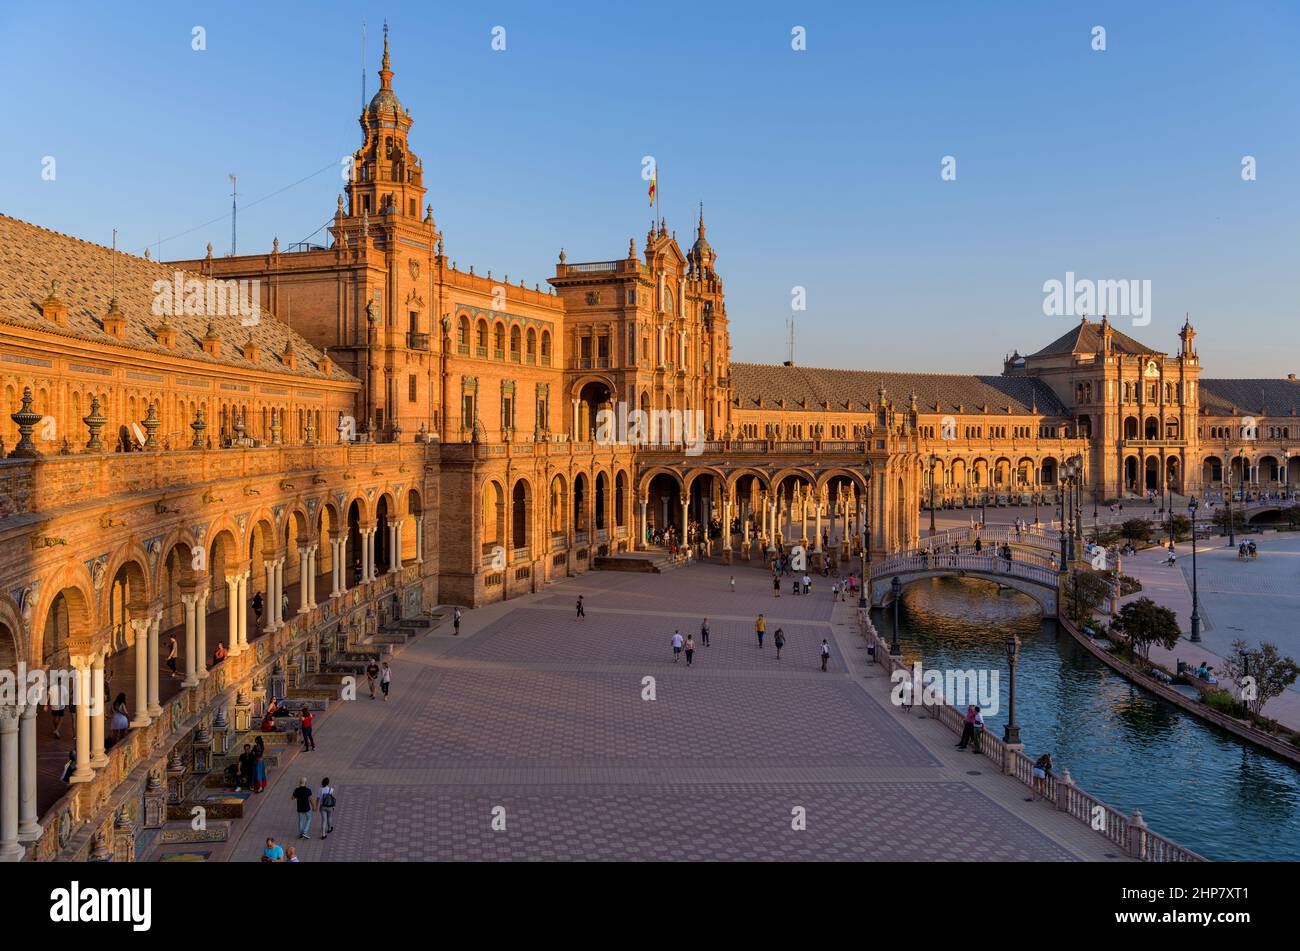 Sunset Spanish Square - A golden autumn sunset view of the brick and tile buildings, bridges and canal of Spanish Square, Seville, Andalusia, Spain. Stock Photo